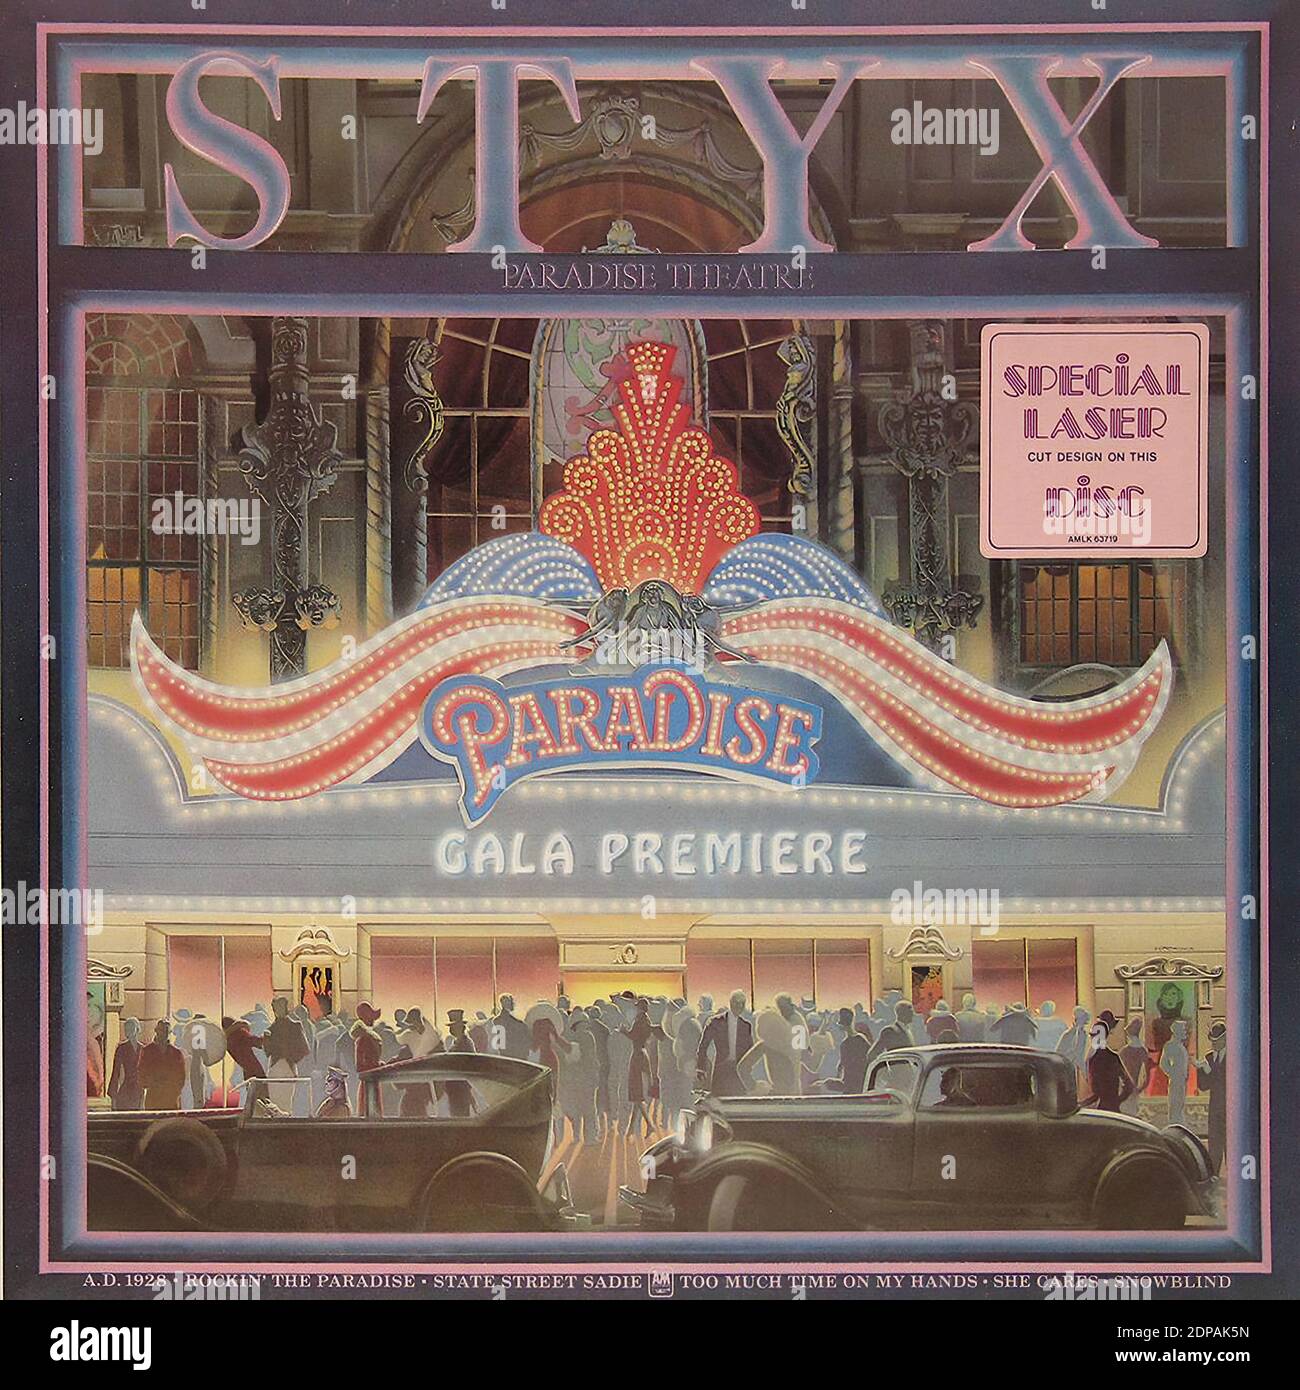 Styx Paradise Theatre Holographic Laser cut edged disc  - Vintage Vinyl Record Cover01 Stock Photo